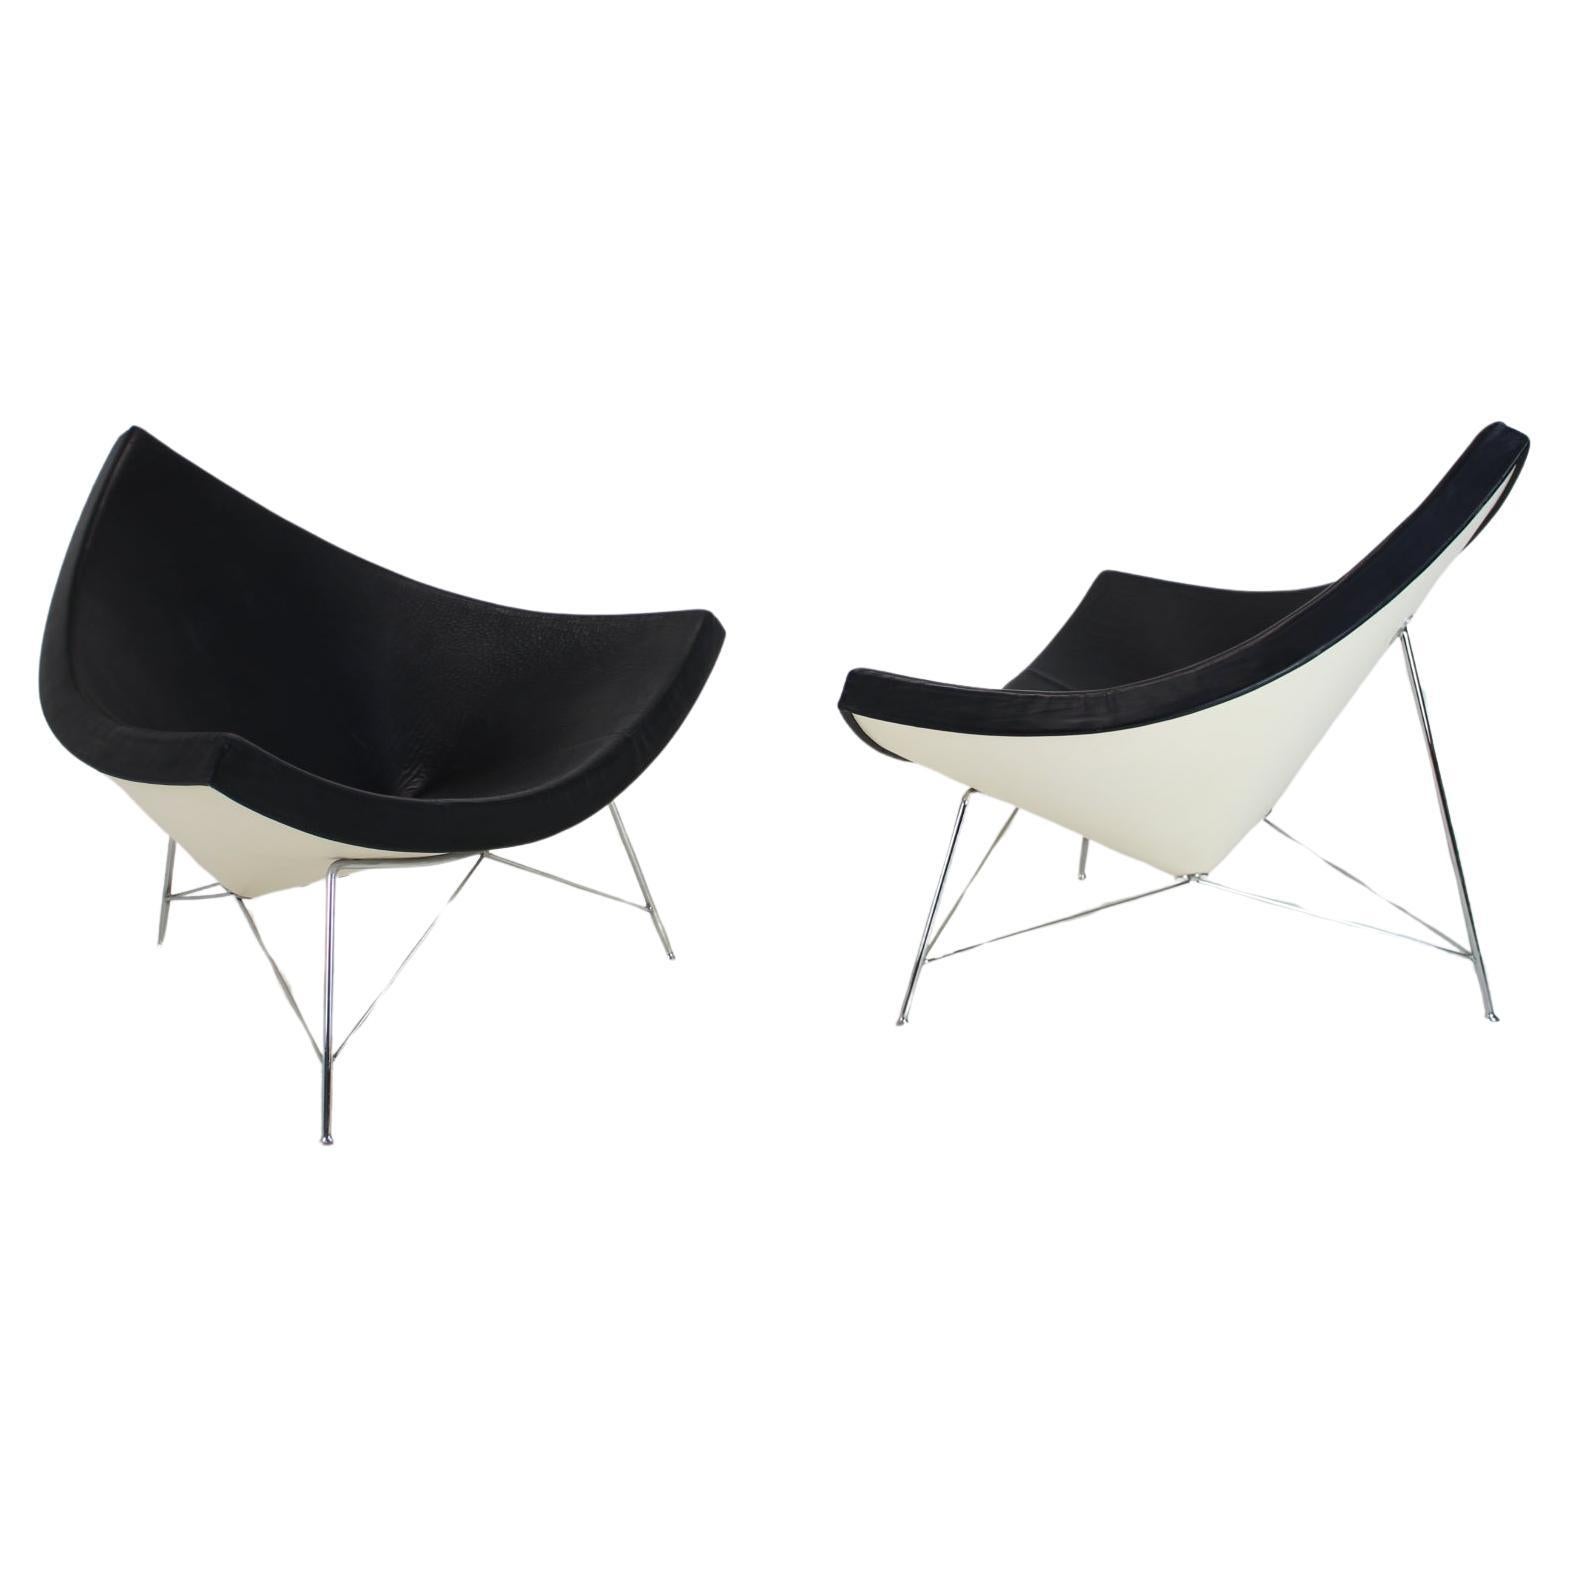 Set of Two Leather Original George Nelson Coconut Chairs, Vitra